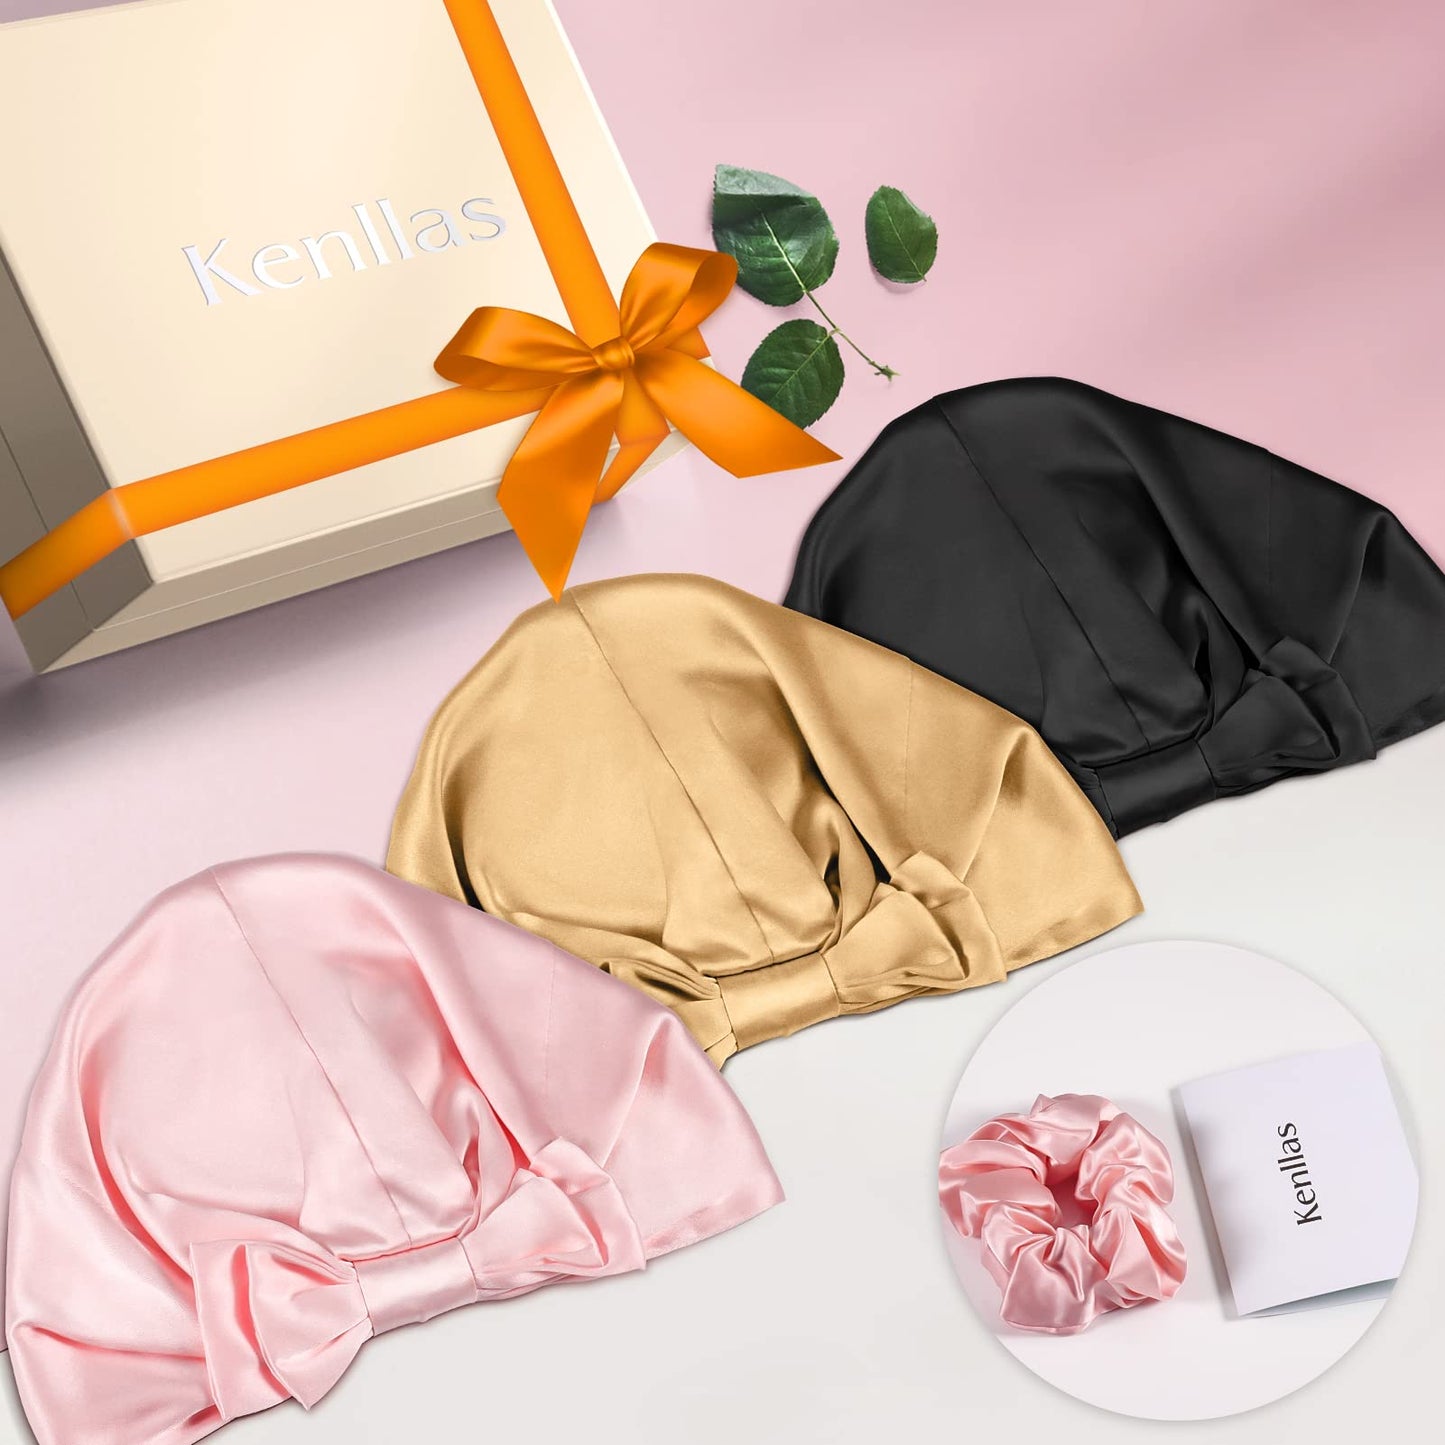 Kenllas 22-Momme 100% Mulberry-Silk Bonnet - Natural Pure Silk Sleep Cap for Women Curly Hair Care Cover with Tie and Elastic Band (Pink - Double Layer)